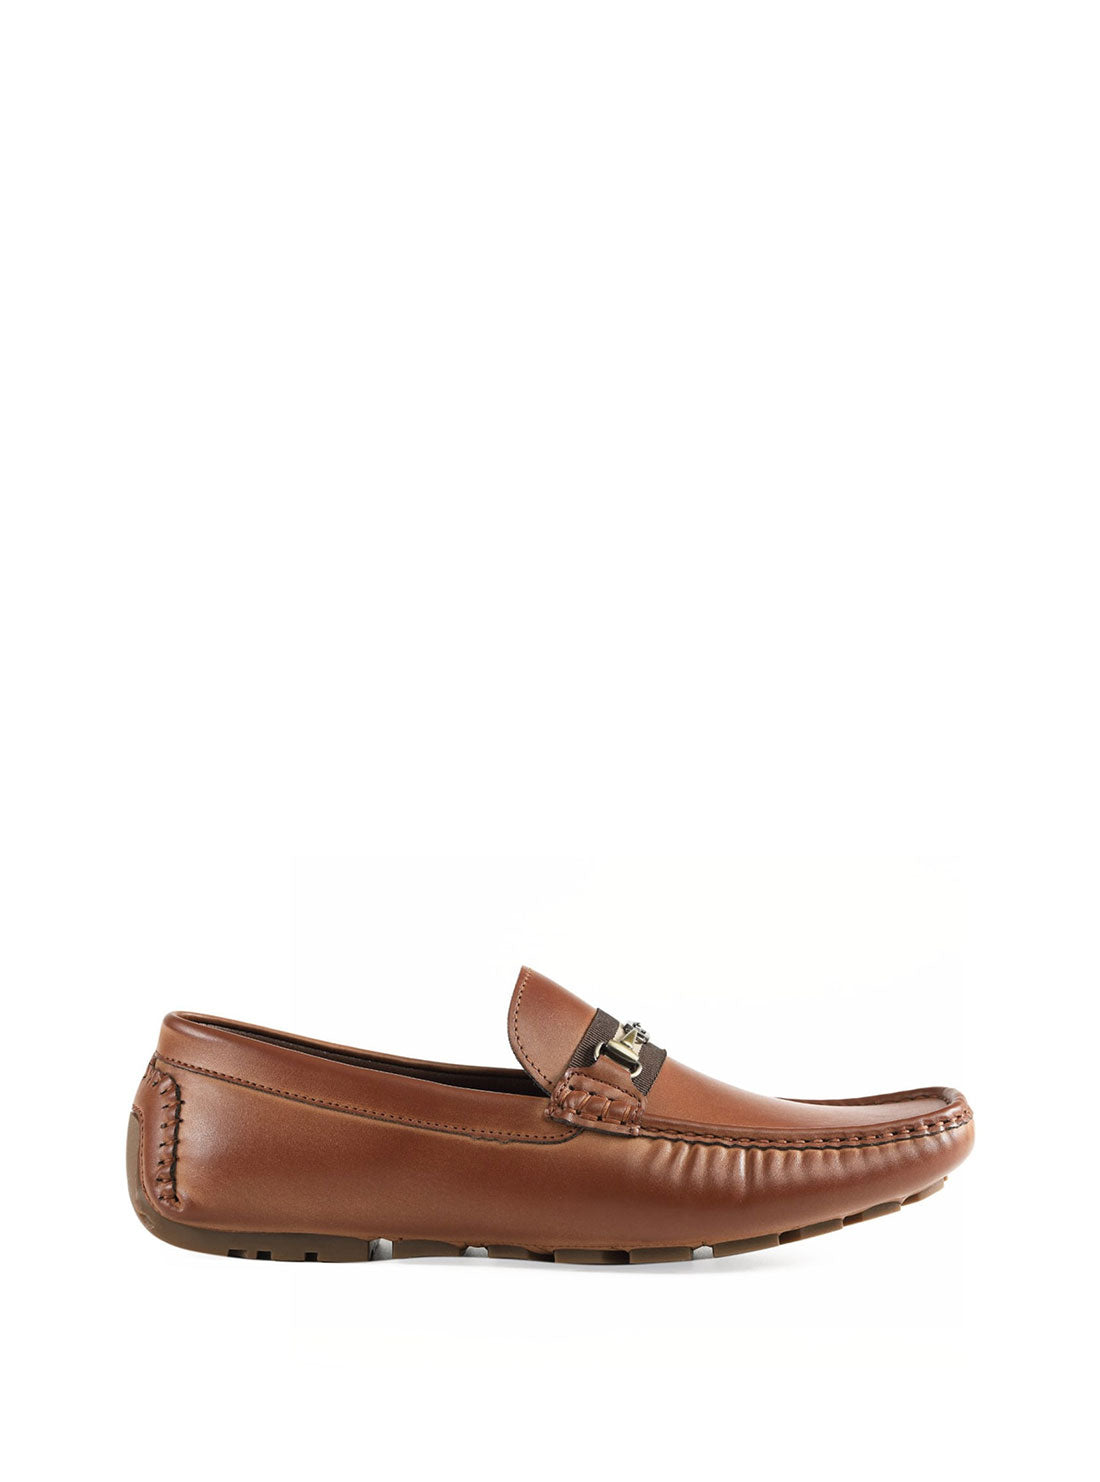 GUESS Brown Aarav Loafers side view